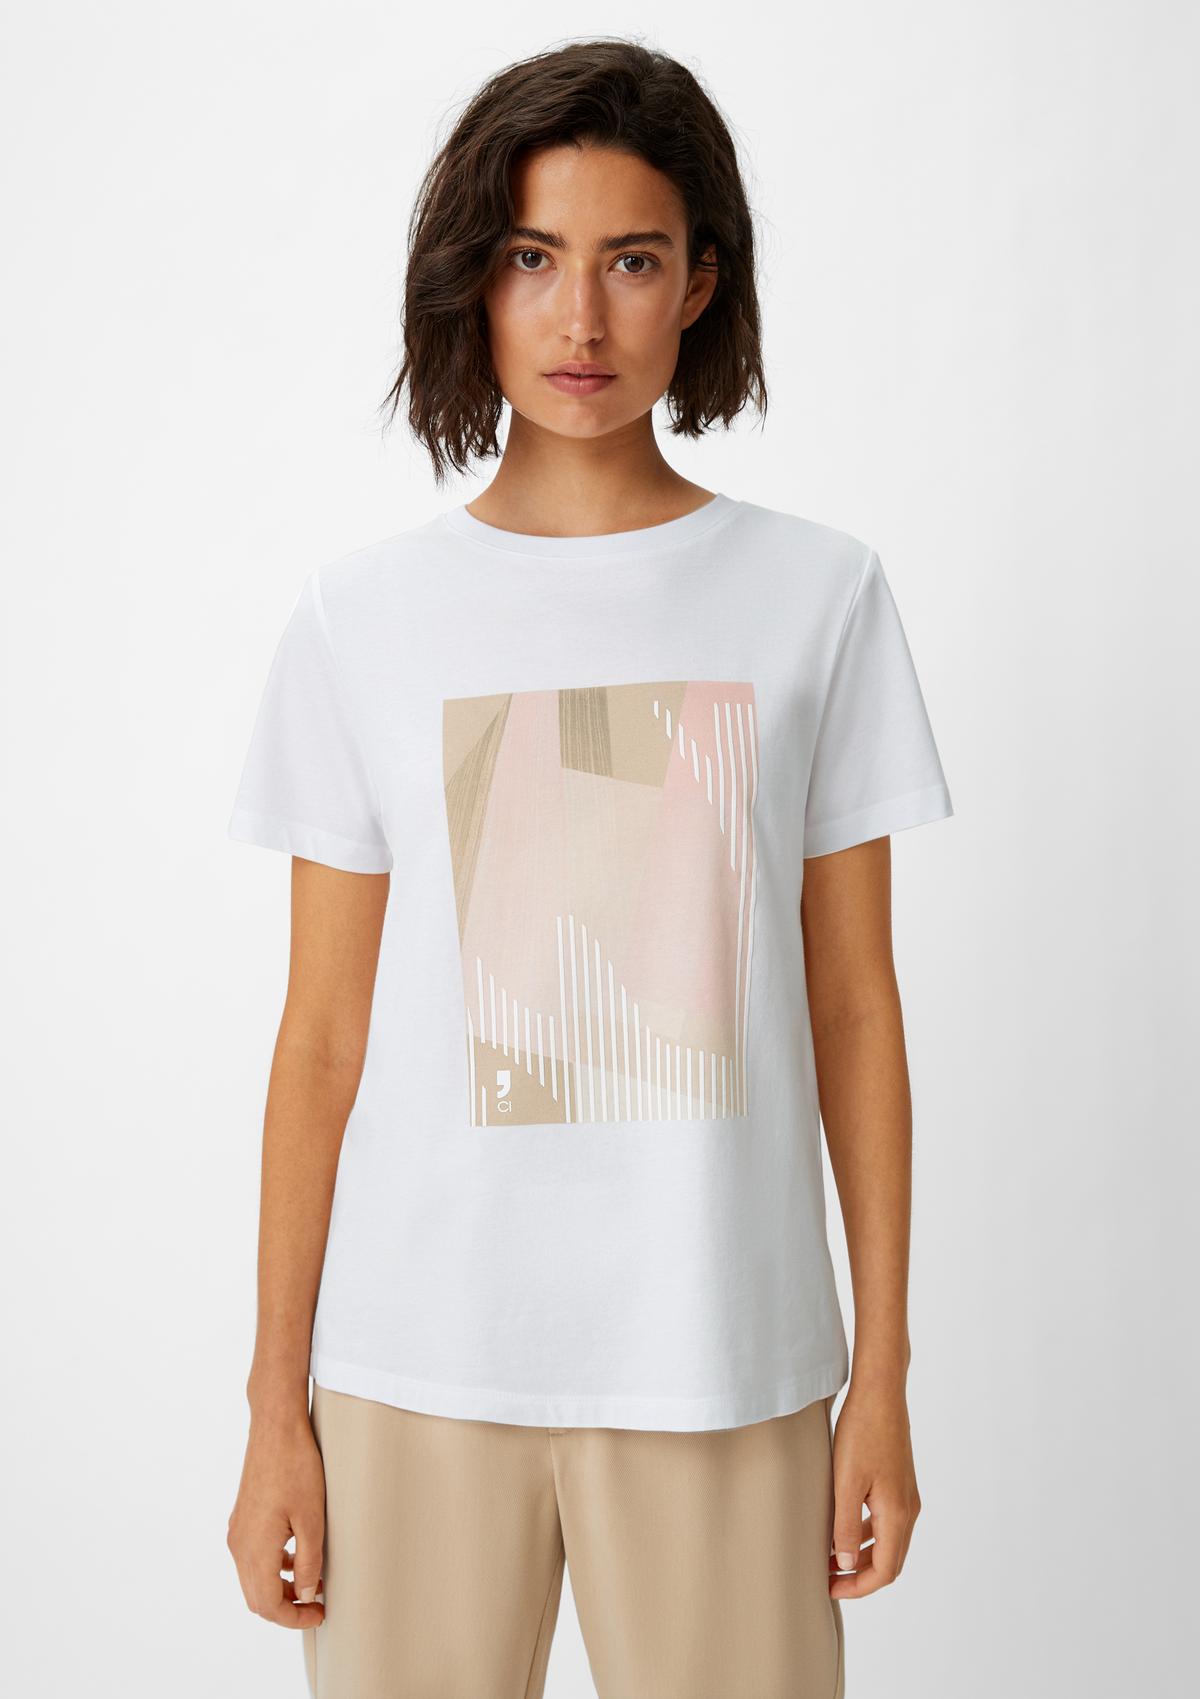 T-shirt made of pure cotton - white | Comma